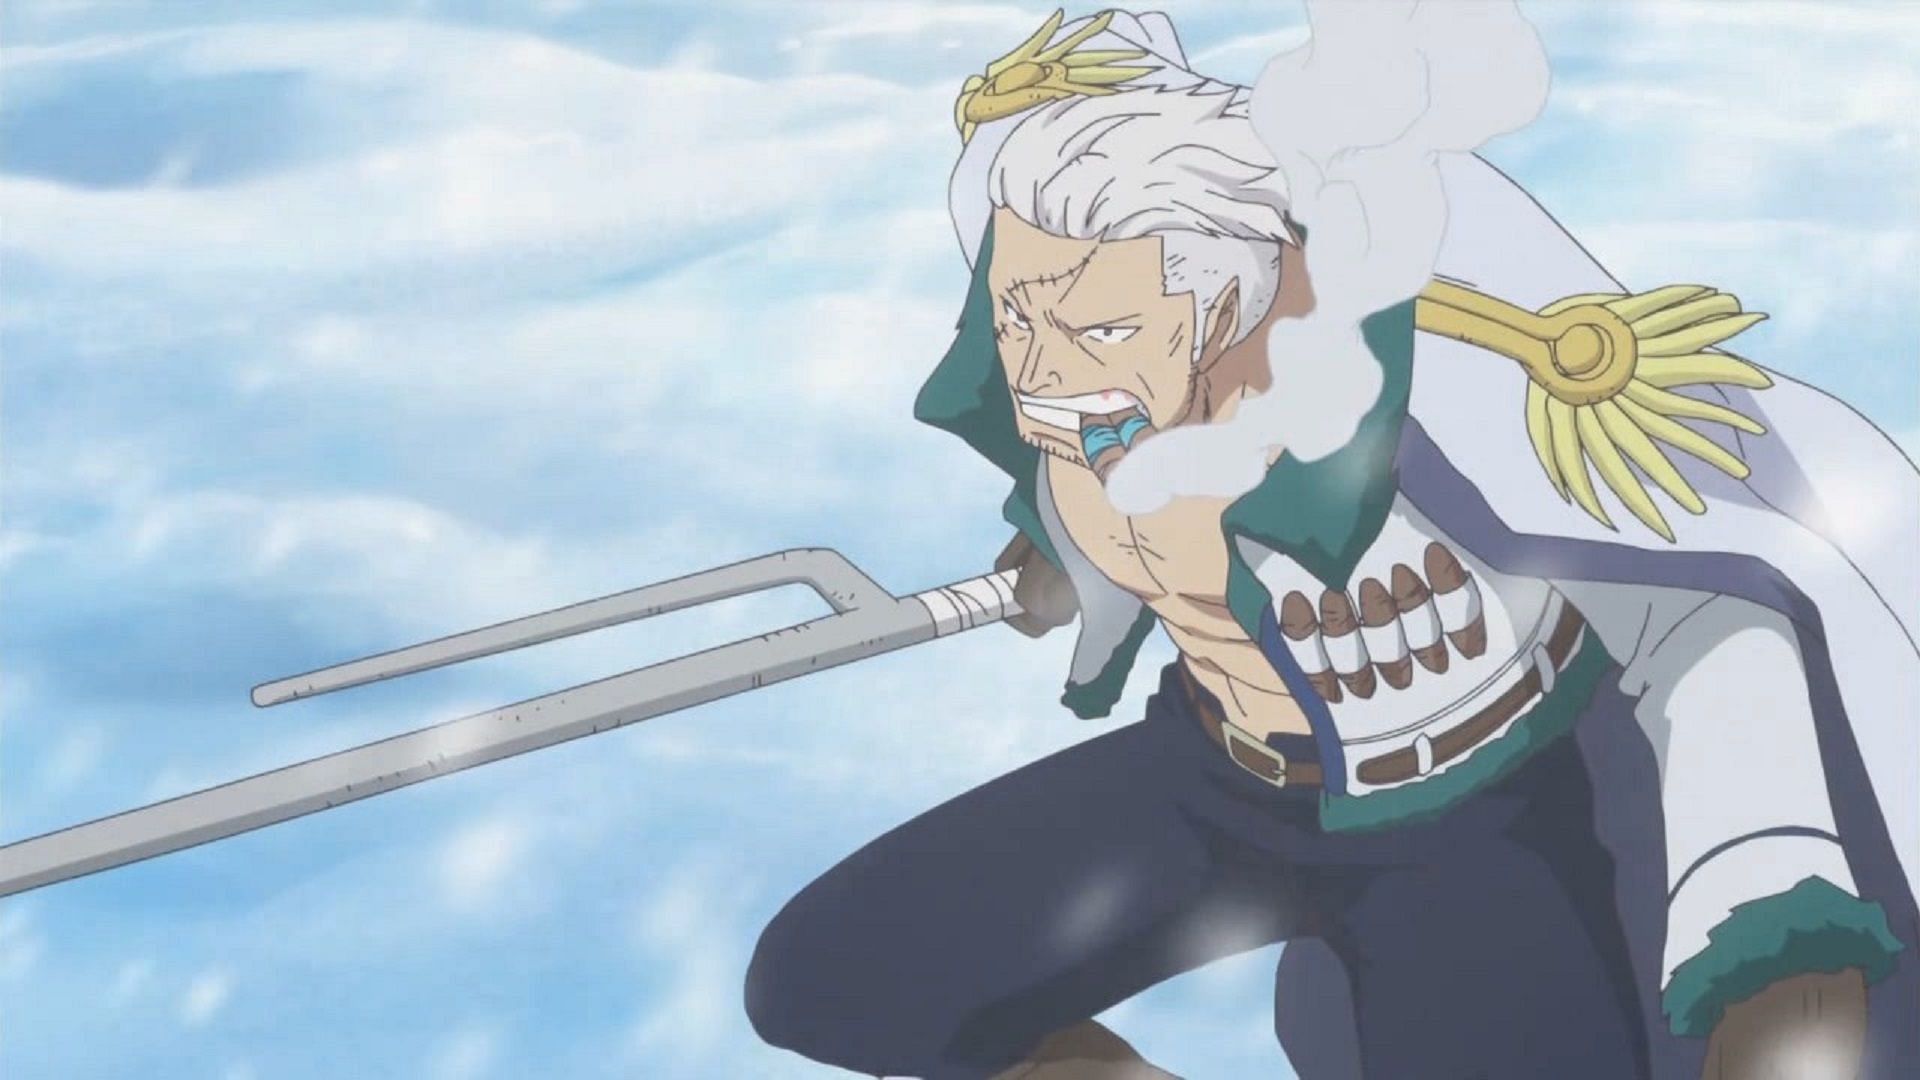 Since the resume of the One Piece series after the time skip, Smoker didn't seem as threatening as before (Image via Toei Animation, One Piece)